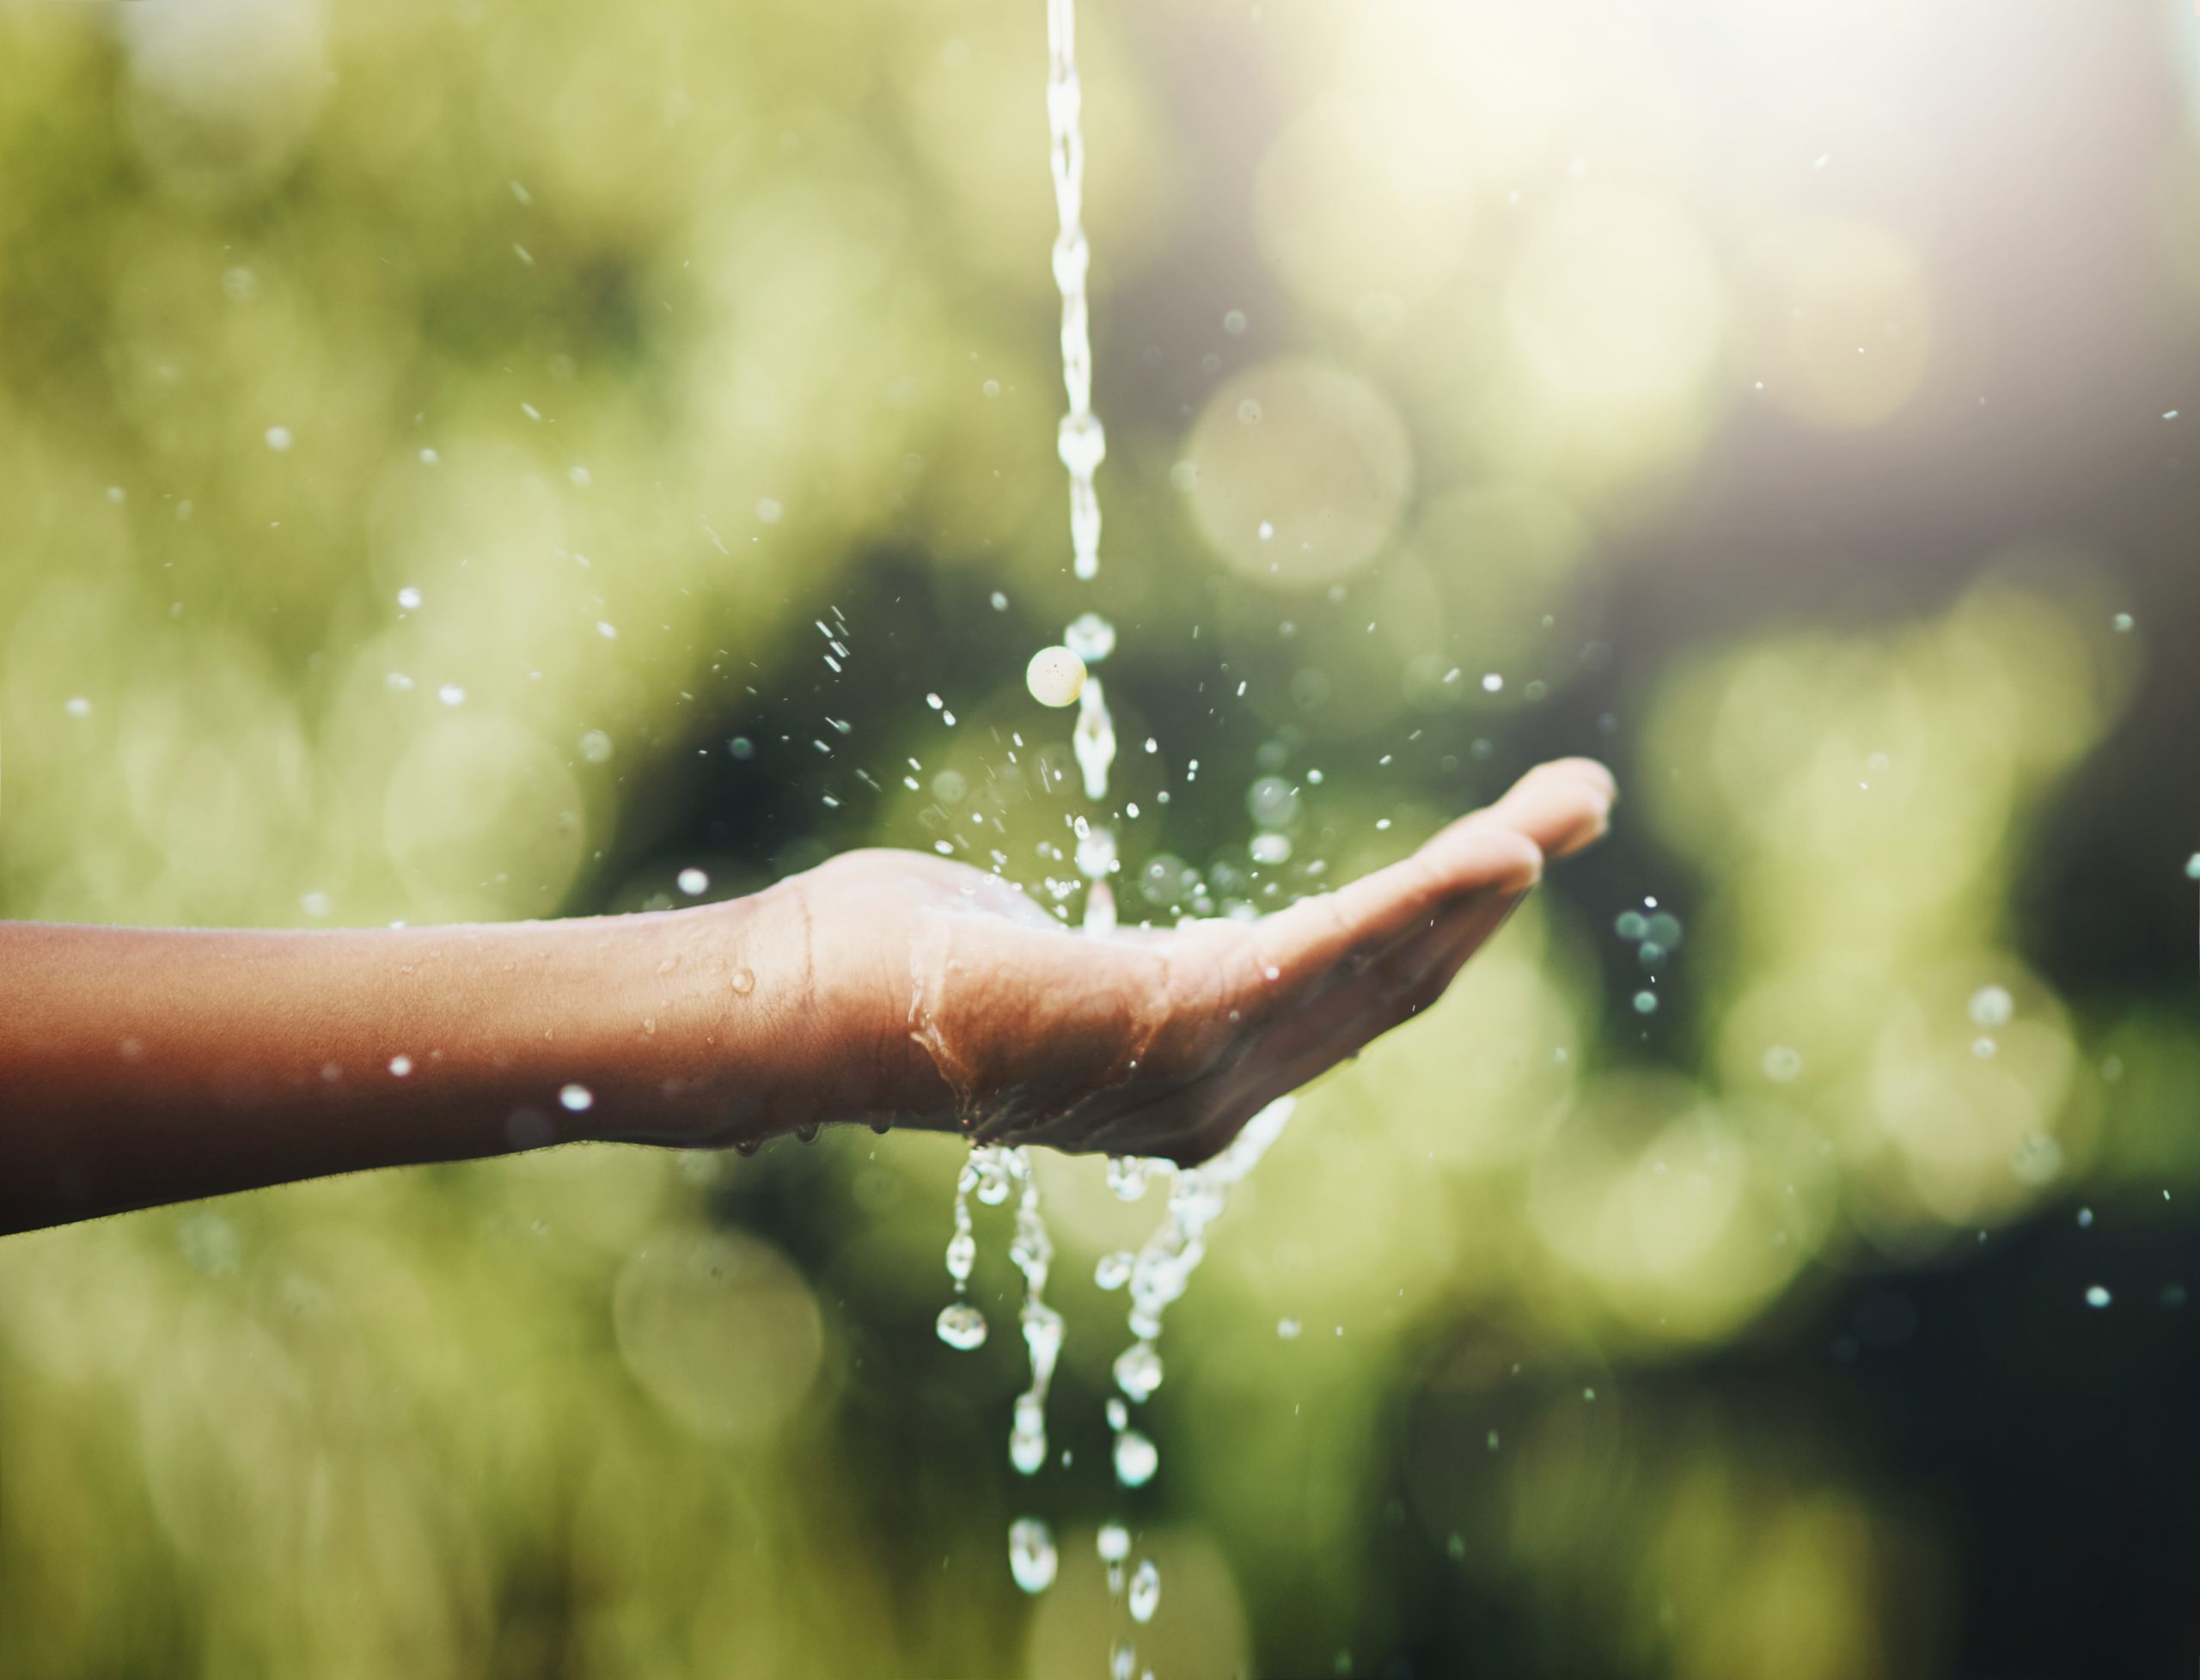 Hygiene, washing and saving water with hands against a green nature background. Closeup of one person holding out their palm to save, conserve and refresh with water in a park, garden or backyard.